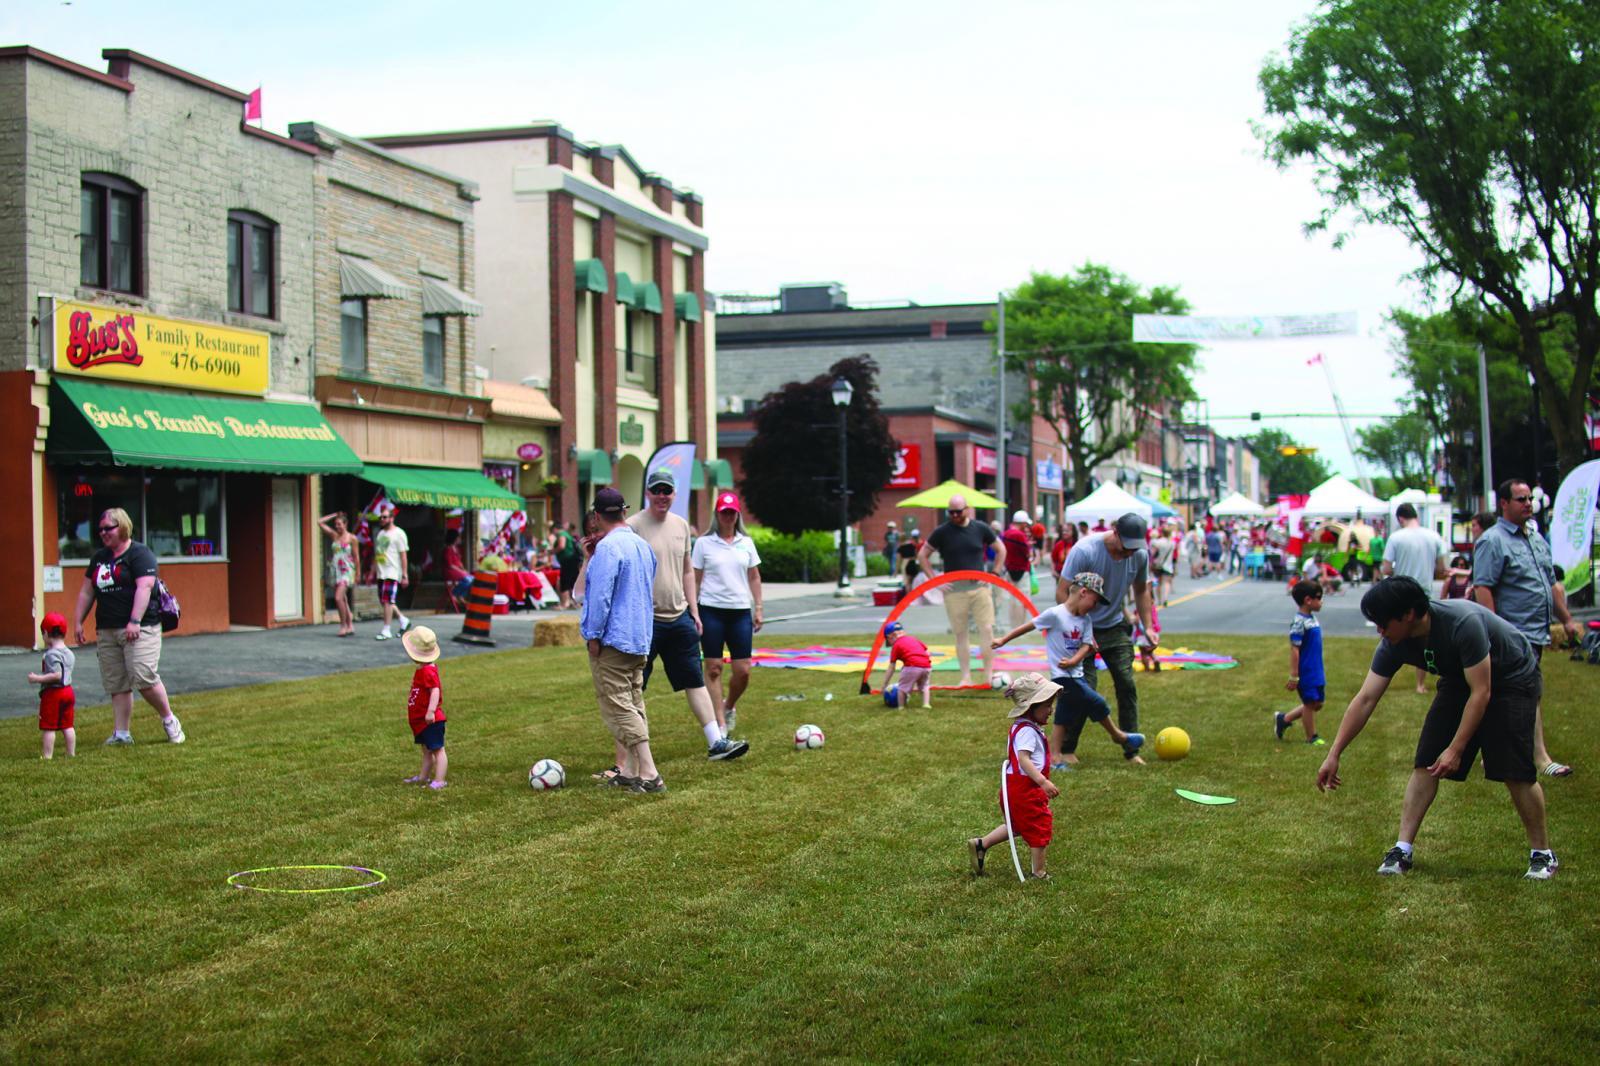 Earlier this year, a section of downtown Picton, Ont. looked more like a park during Canada Day festivities.